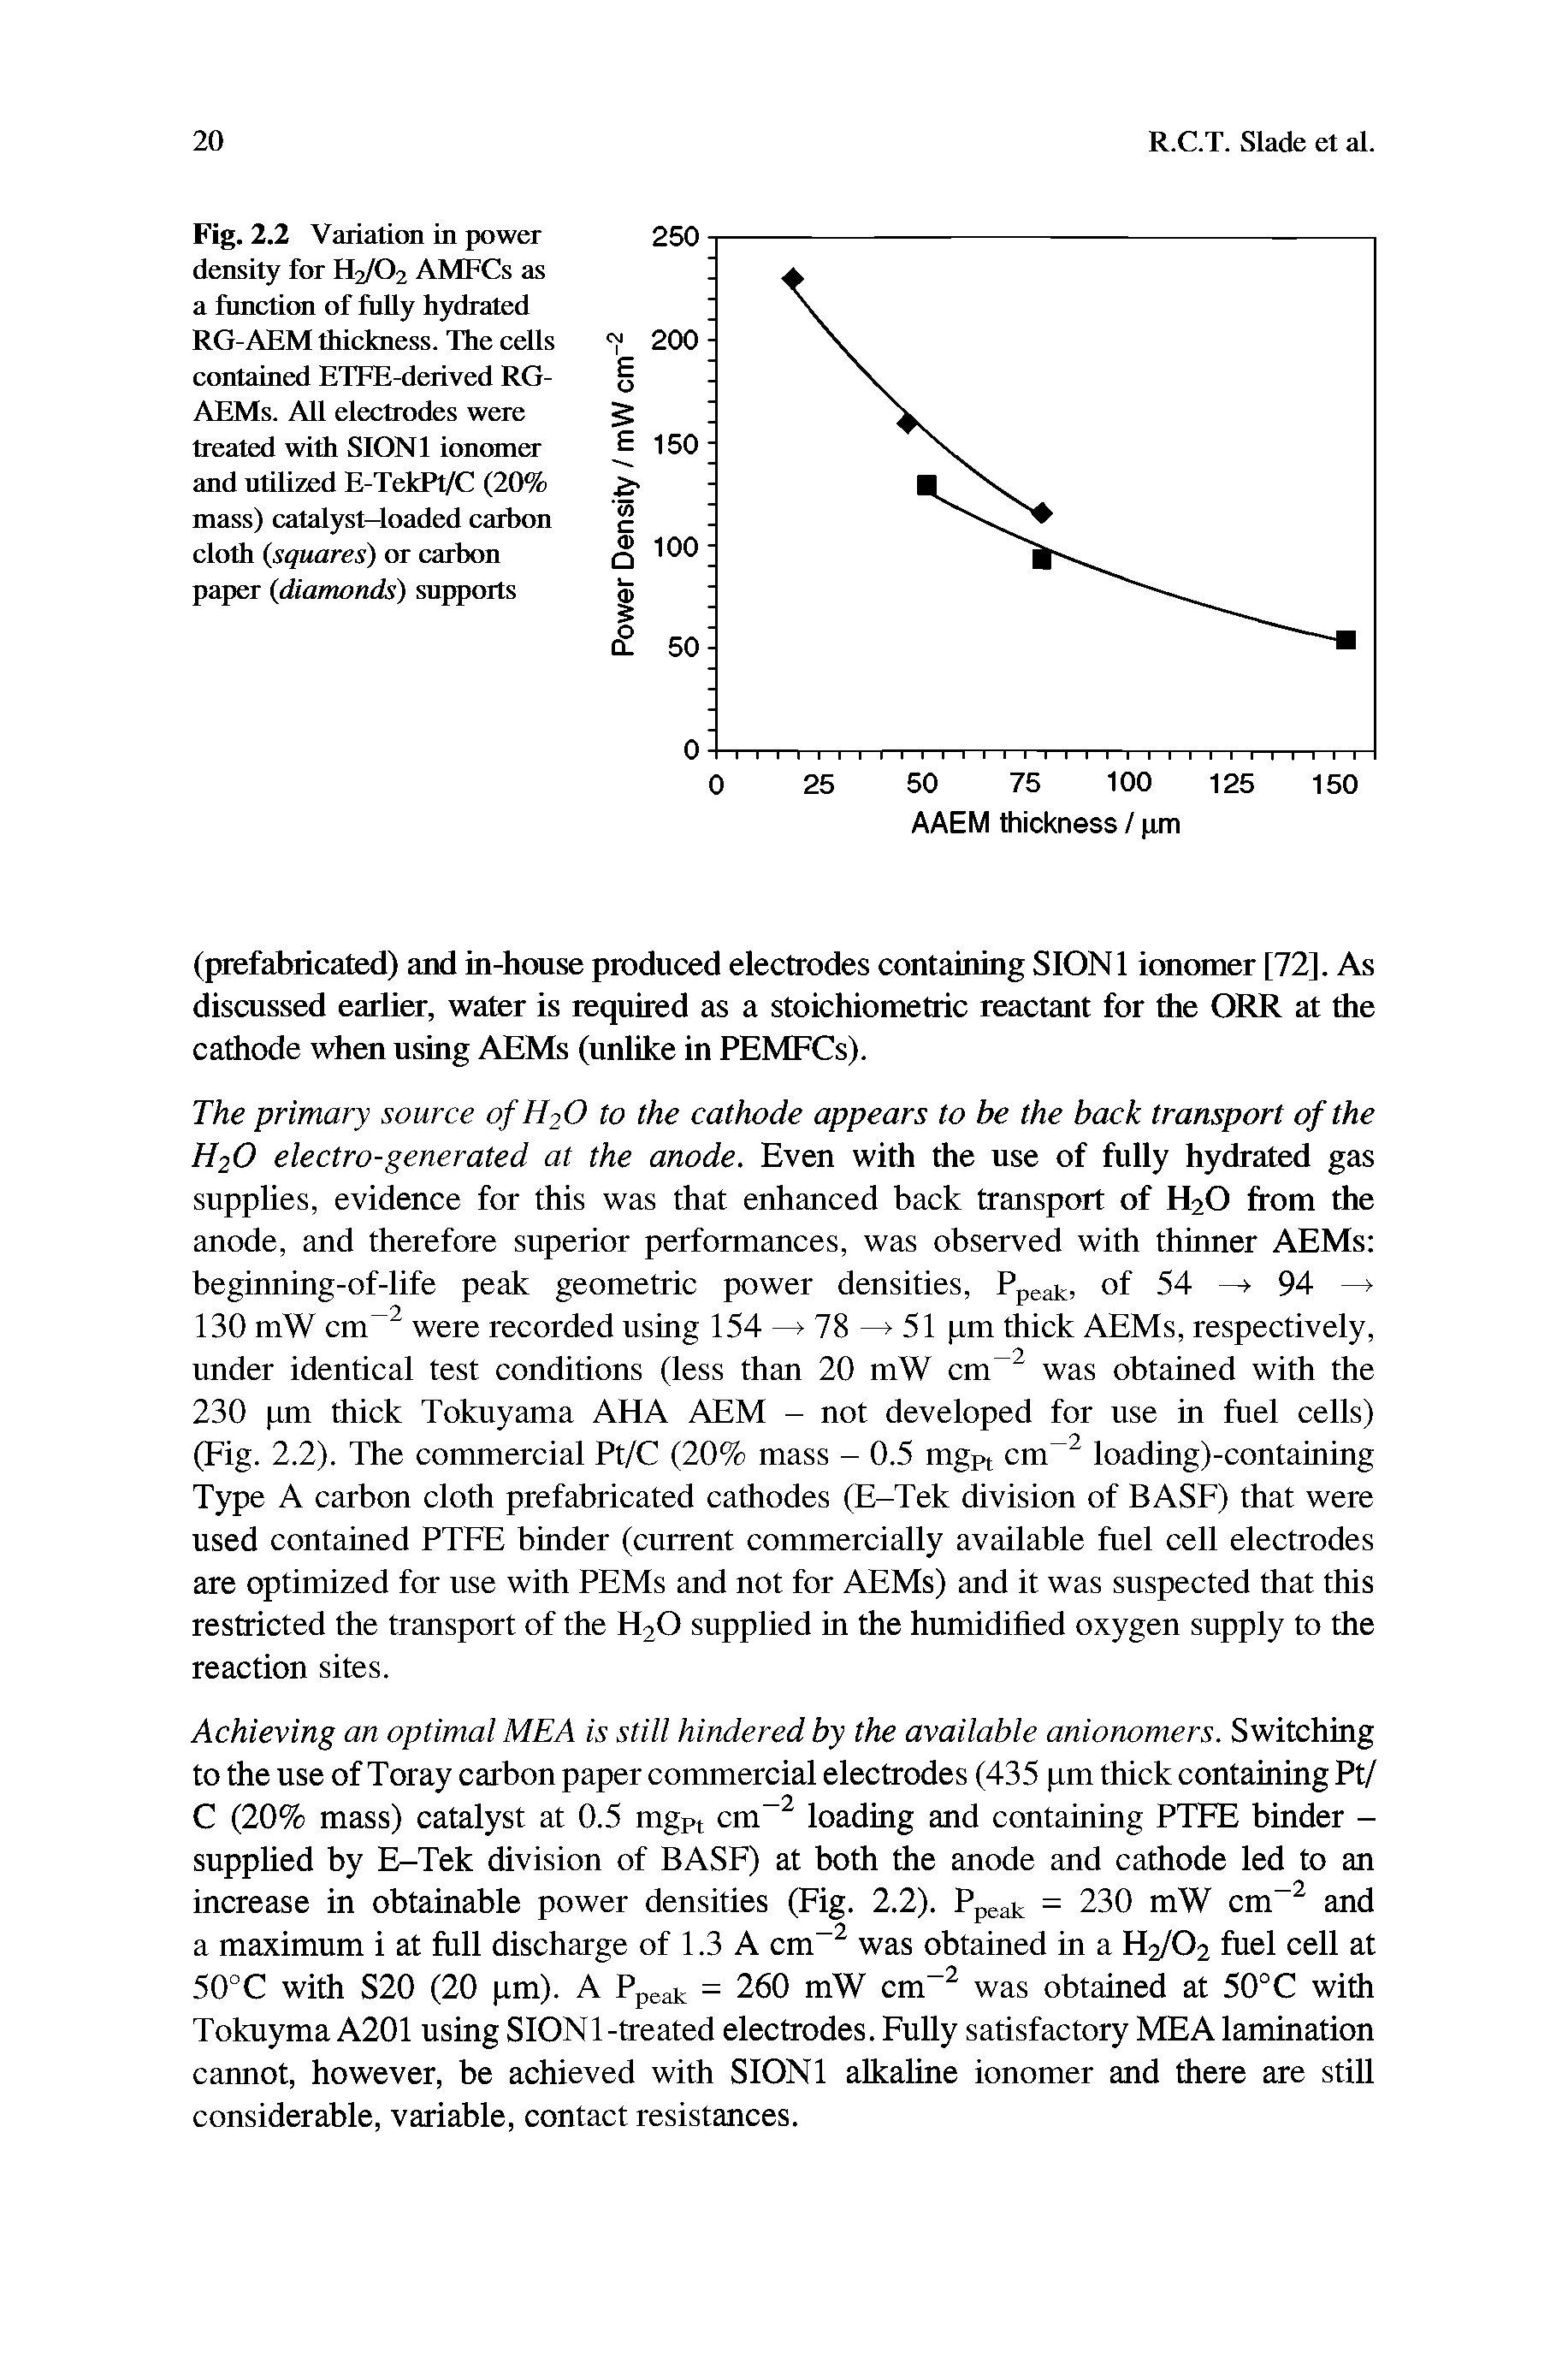 Fig. 2.2 Variation in power density for H2/O2 AMFCs as a function of fully hydrated RG-AEM thickness. The cells contained ETFE-derived RG-AEMs. All electrodes were treated with SIONl ionrancu-and utilized E-TekPl/C (20% mass) catalyst-loaded carbon cloth (squares) or carbon paper (diamonds) supports...